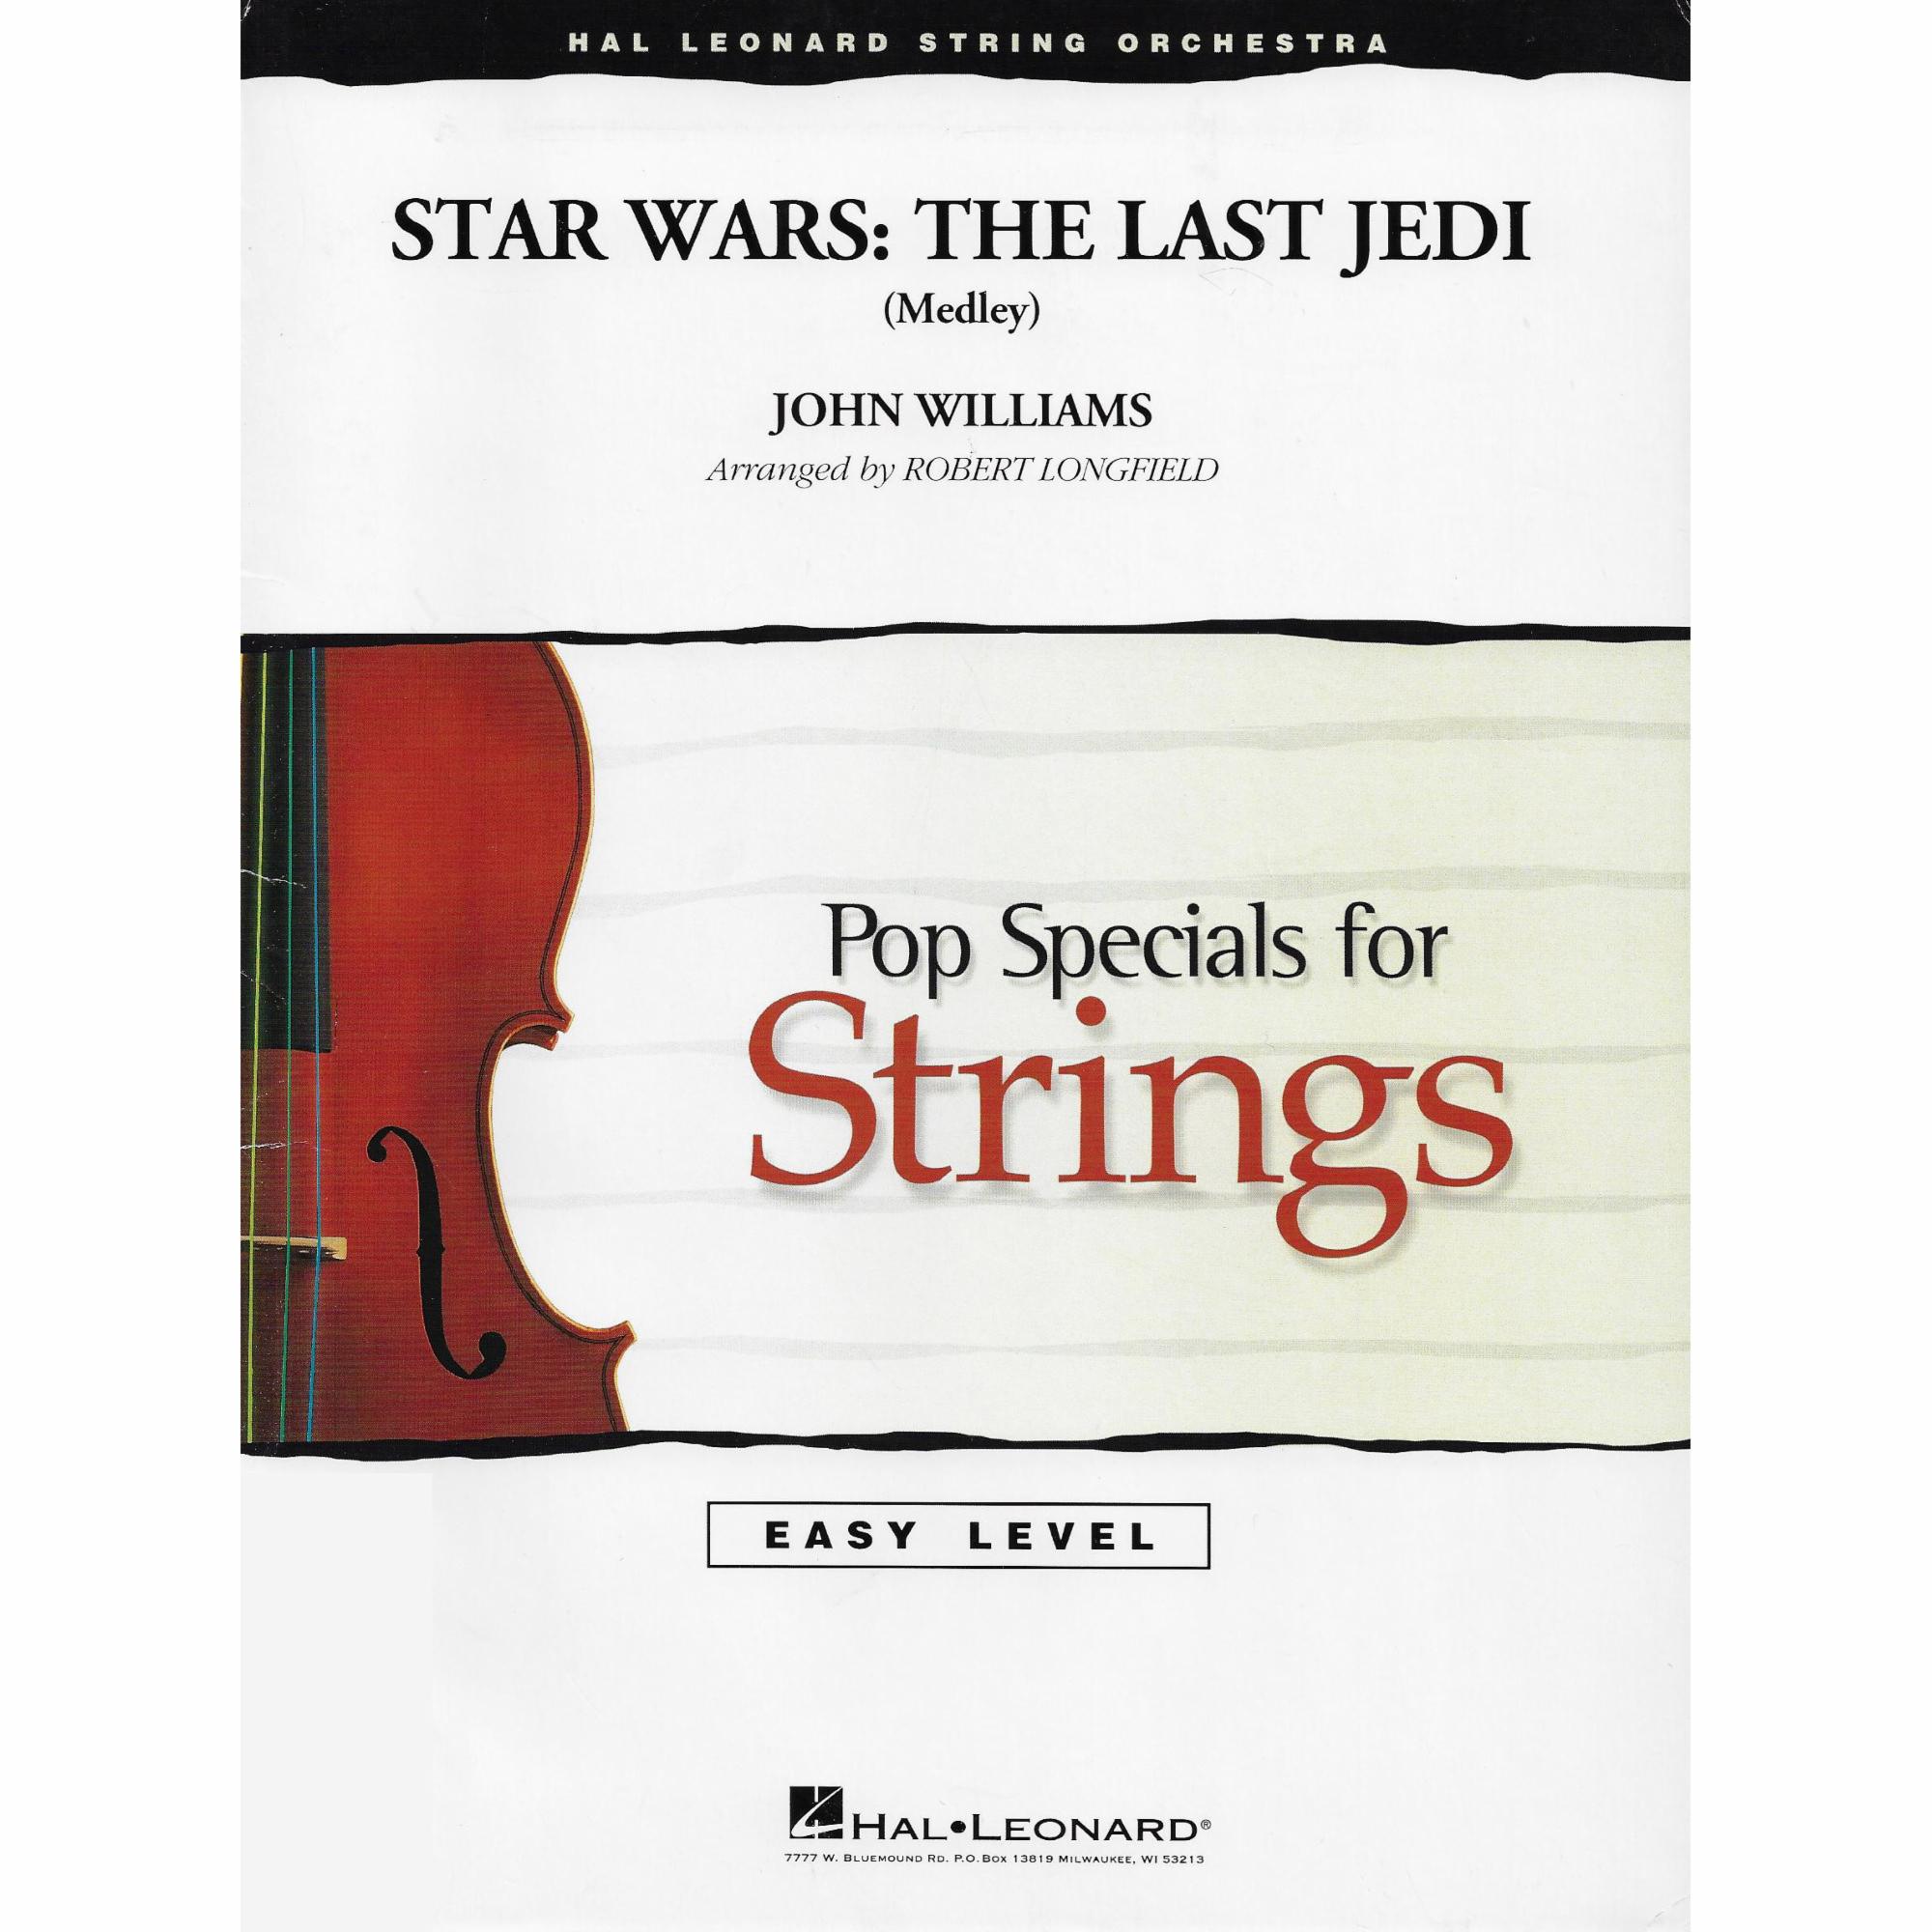 Star Wars: The Last Jedi for String Orchestra